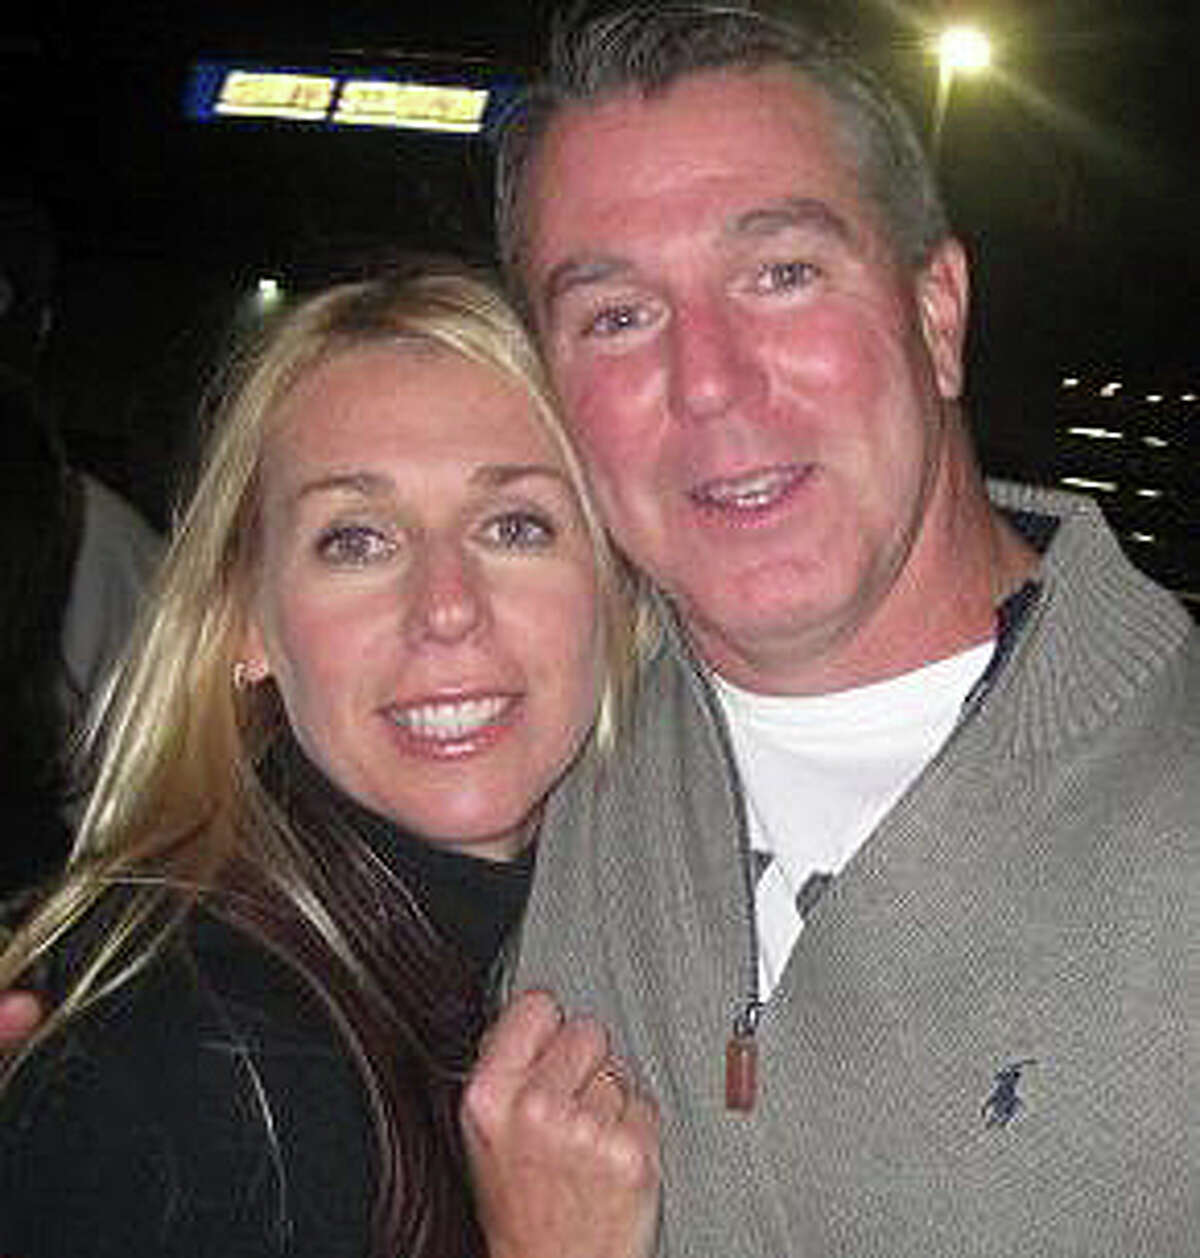 In February a Fairfield police officer shot Fairfield resident Christopher Andrews dead in the climax of what police called a "violent domestic assault." His wife and their three children then were scattered, with various blunt-force injuries and stab wounds, among three area hospitals. In November, a Connecticut prosecutor ruled the shooting was justified. Read more.